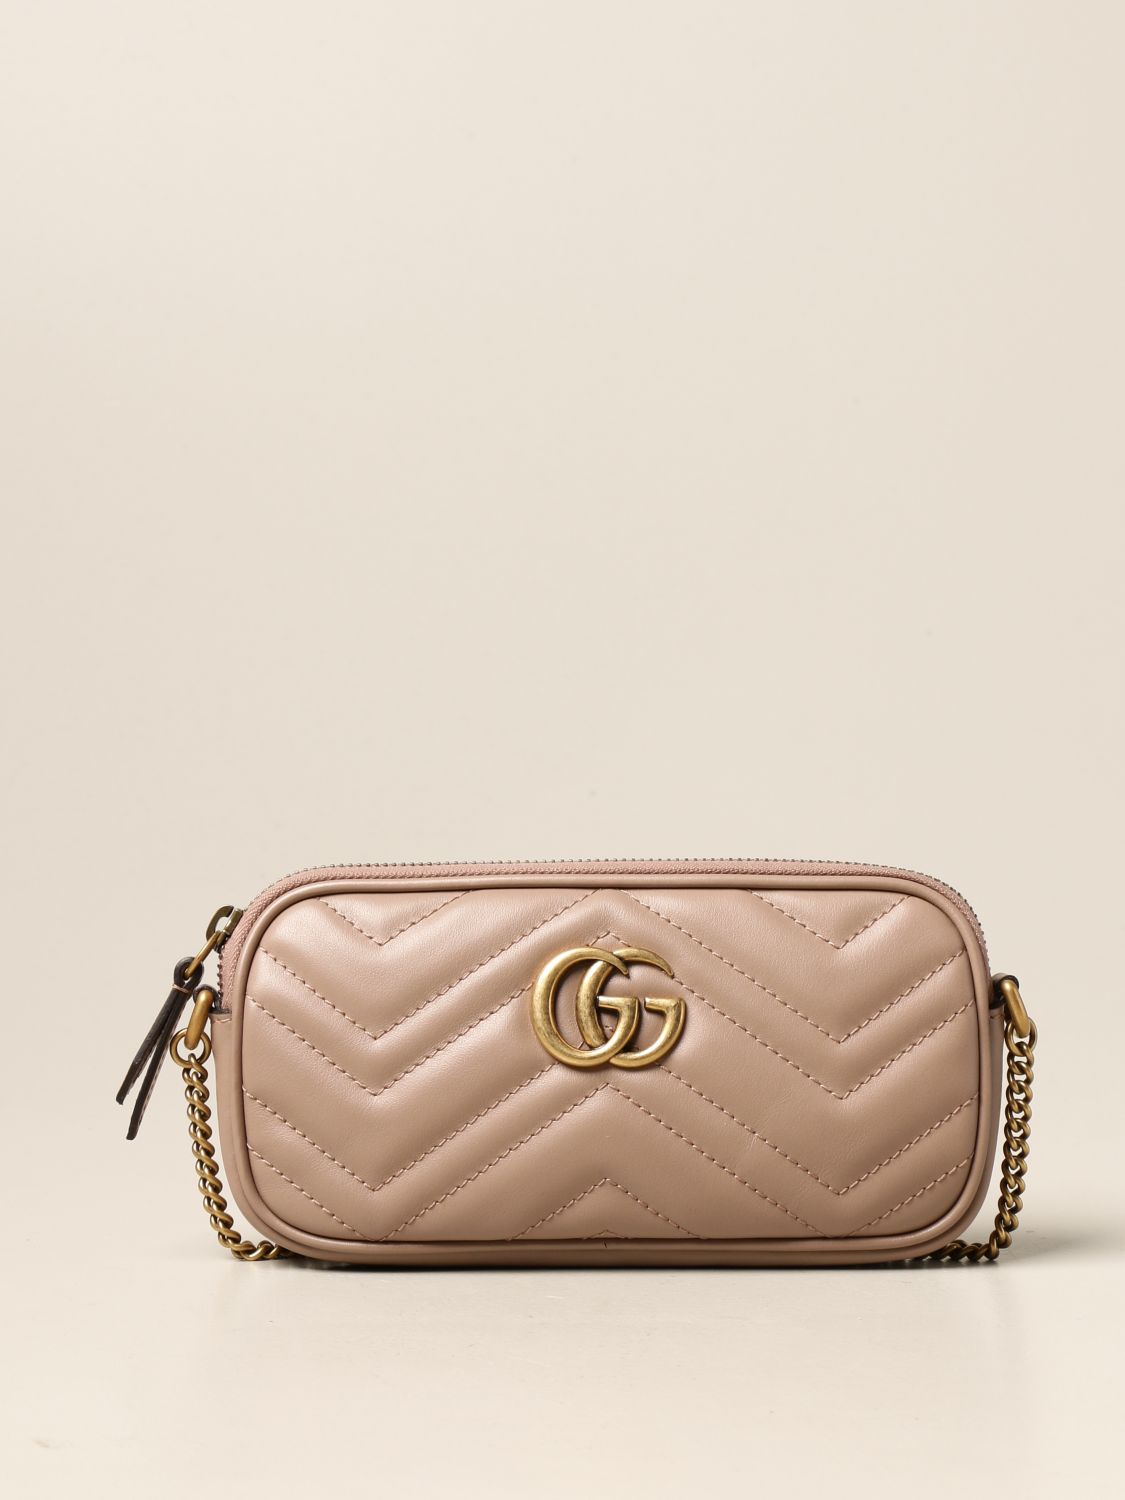 GUCCI: Marmont shoulder bag in quilted leather | Mini Bag Gucci Women Blush Pink | Mini Bag 